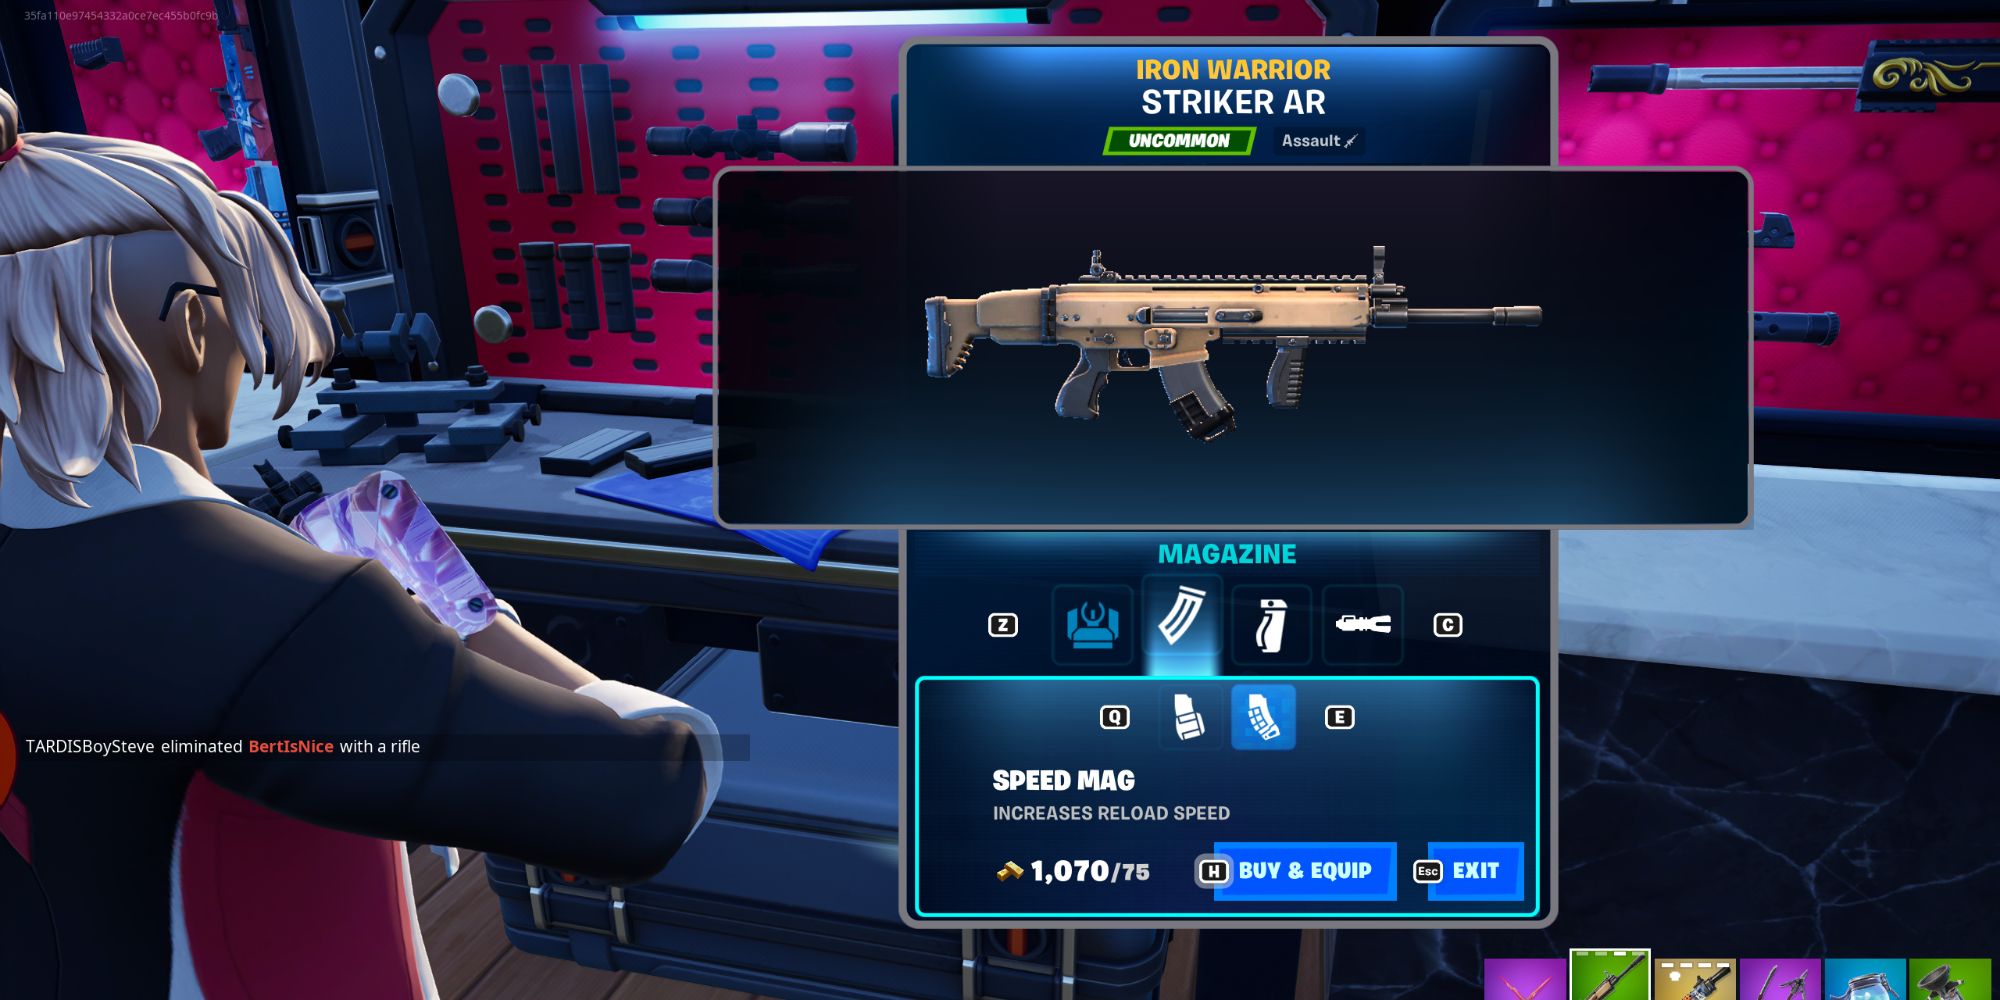 An image from Fortnite of the Speed Mag Attachment, which allows you to reload faster.